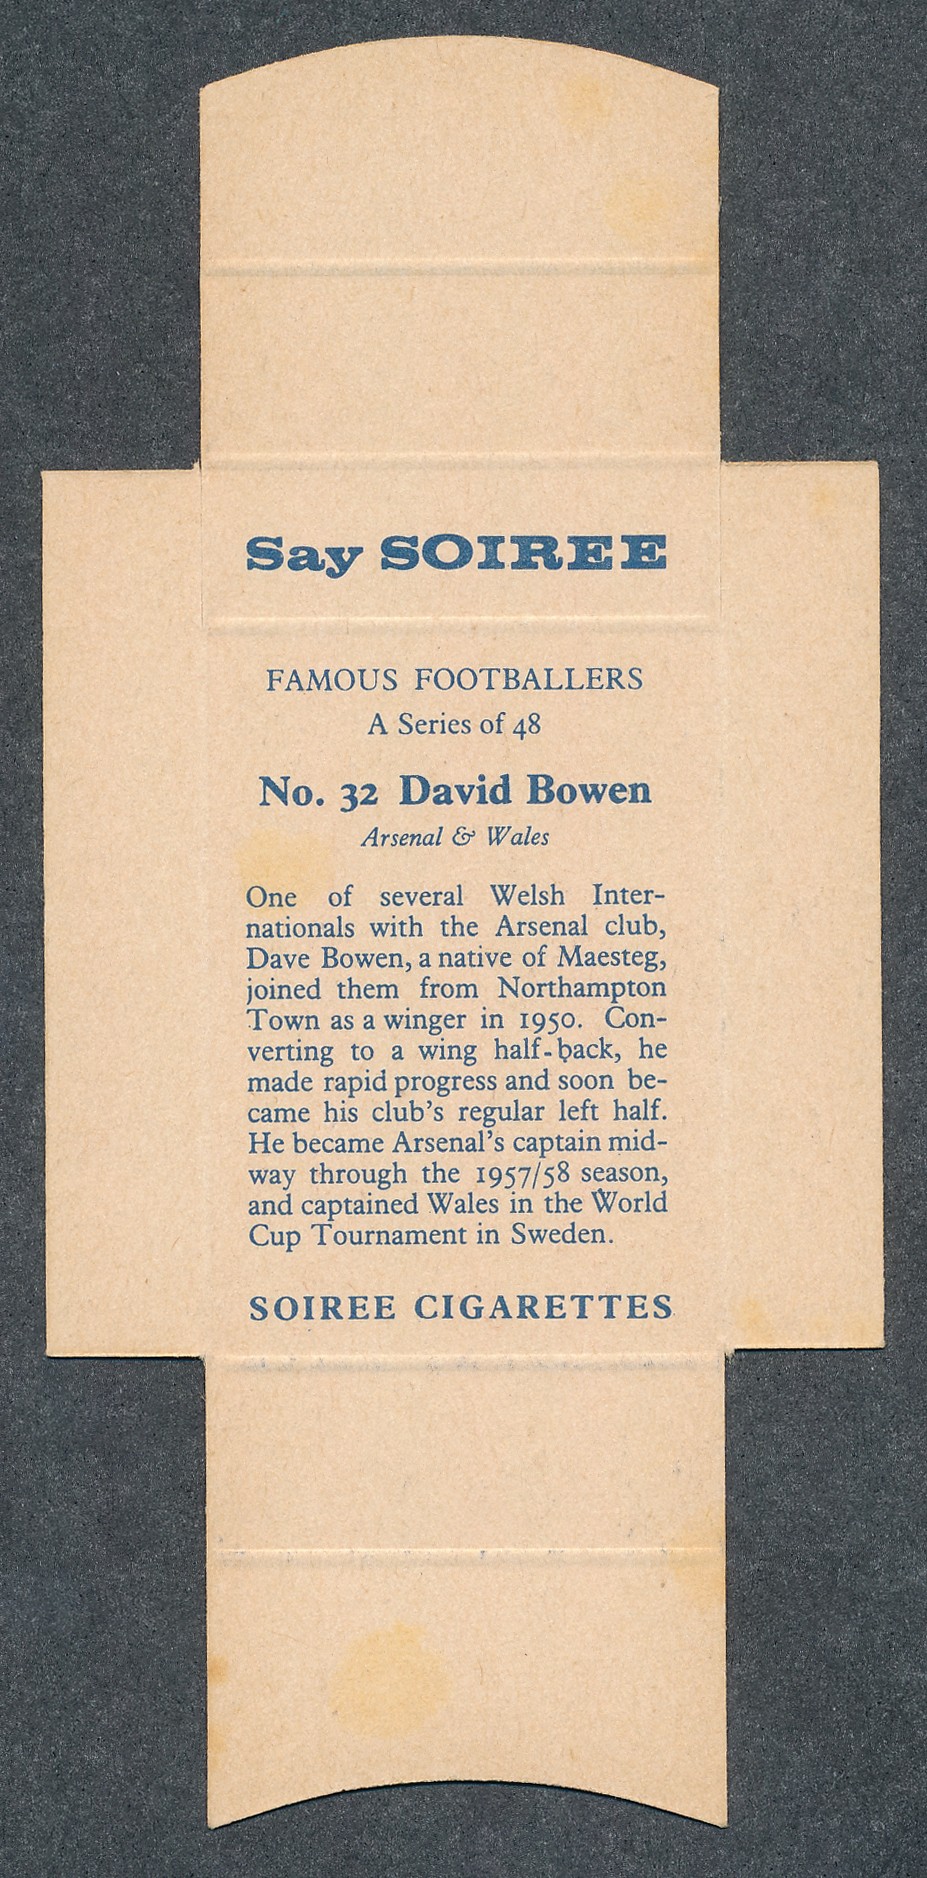 Soiree Cigarettes, Mauritius, Famous Footballers uncut packet issue, o.32 David Bowen, Arsenal & - Image 2 of 2